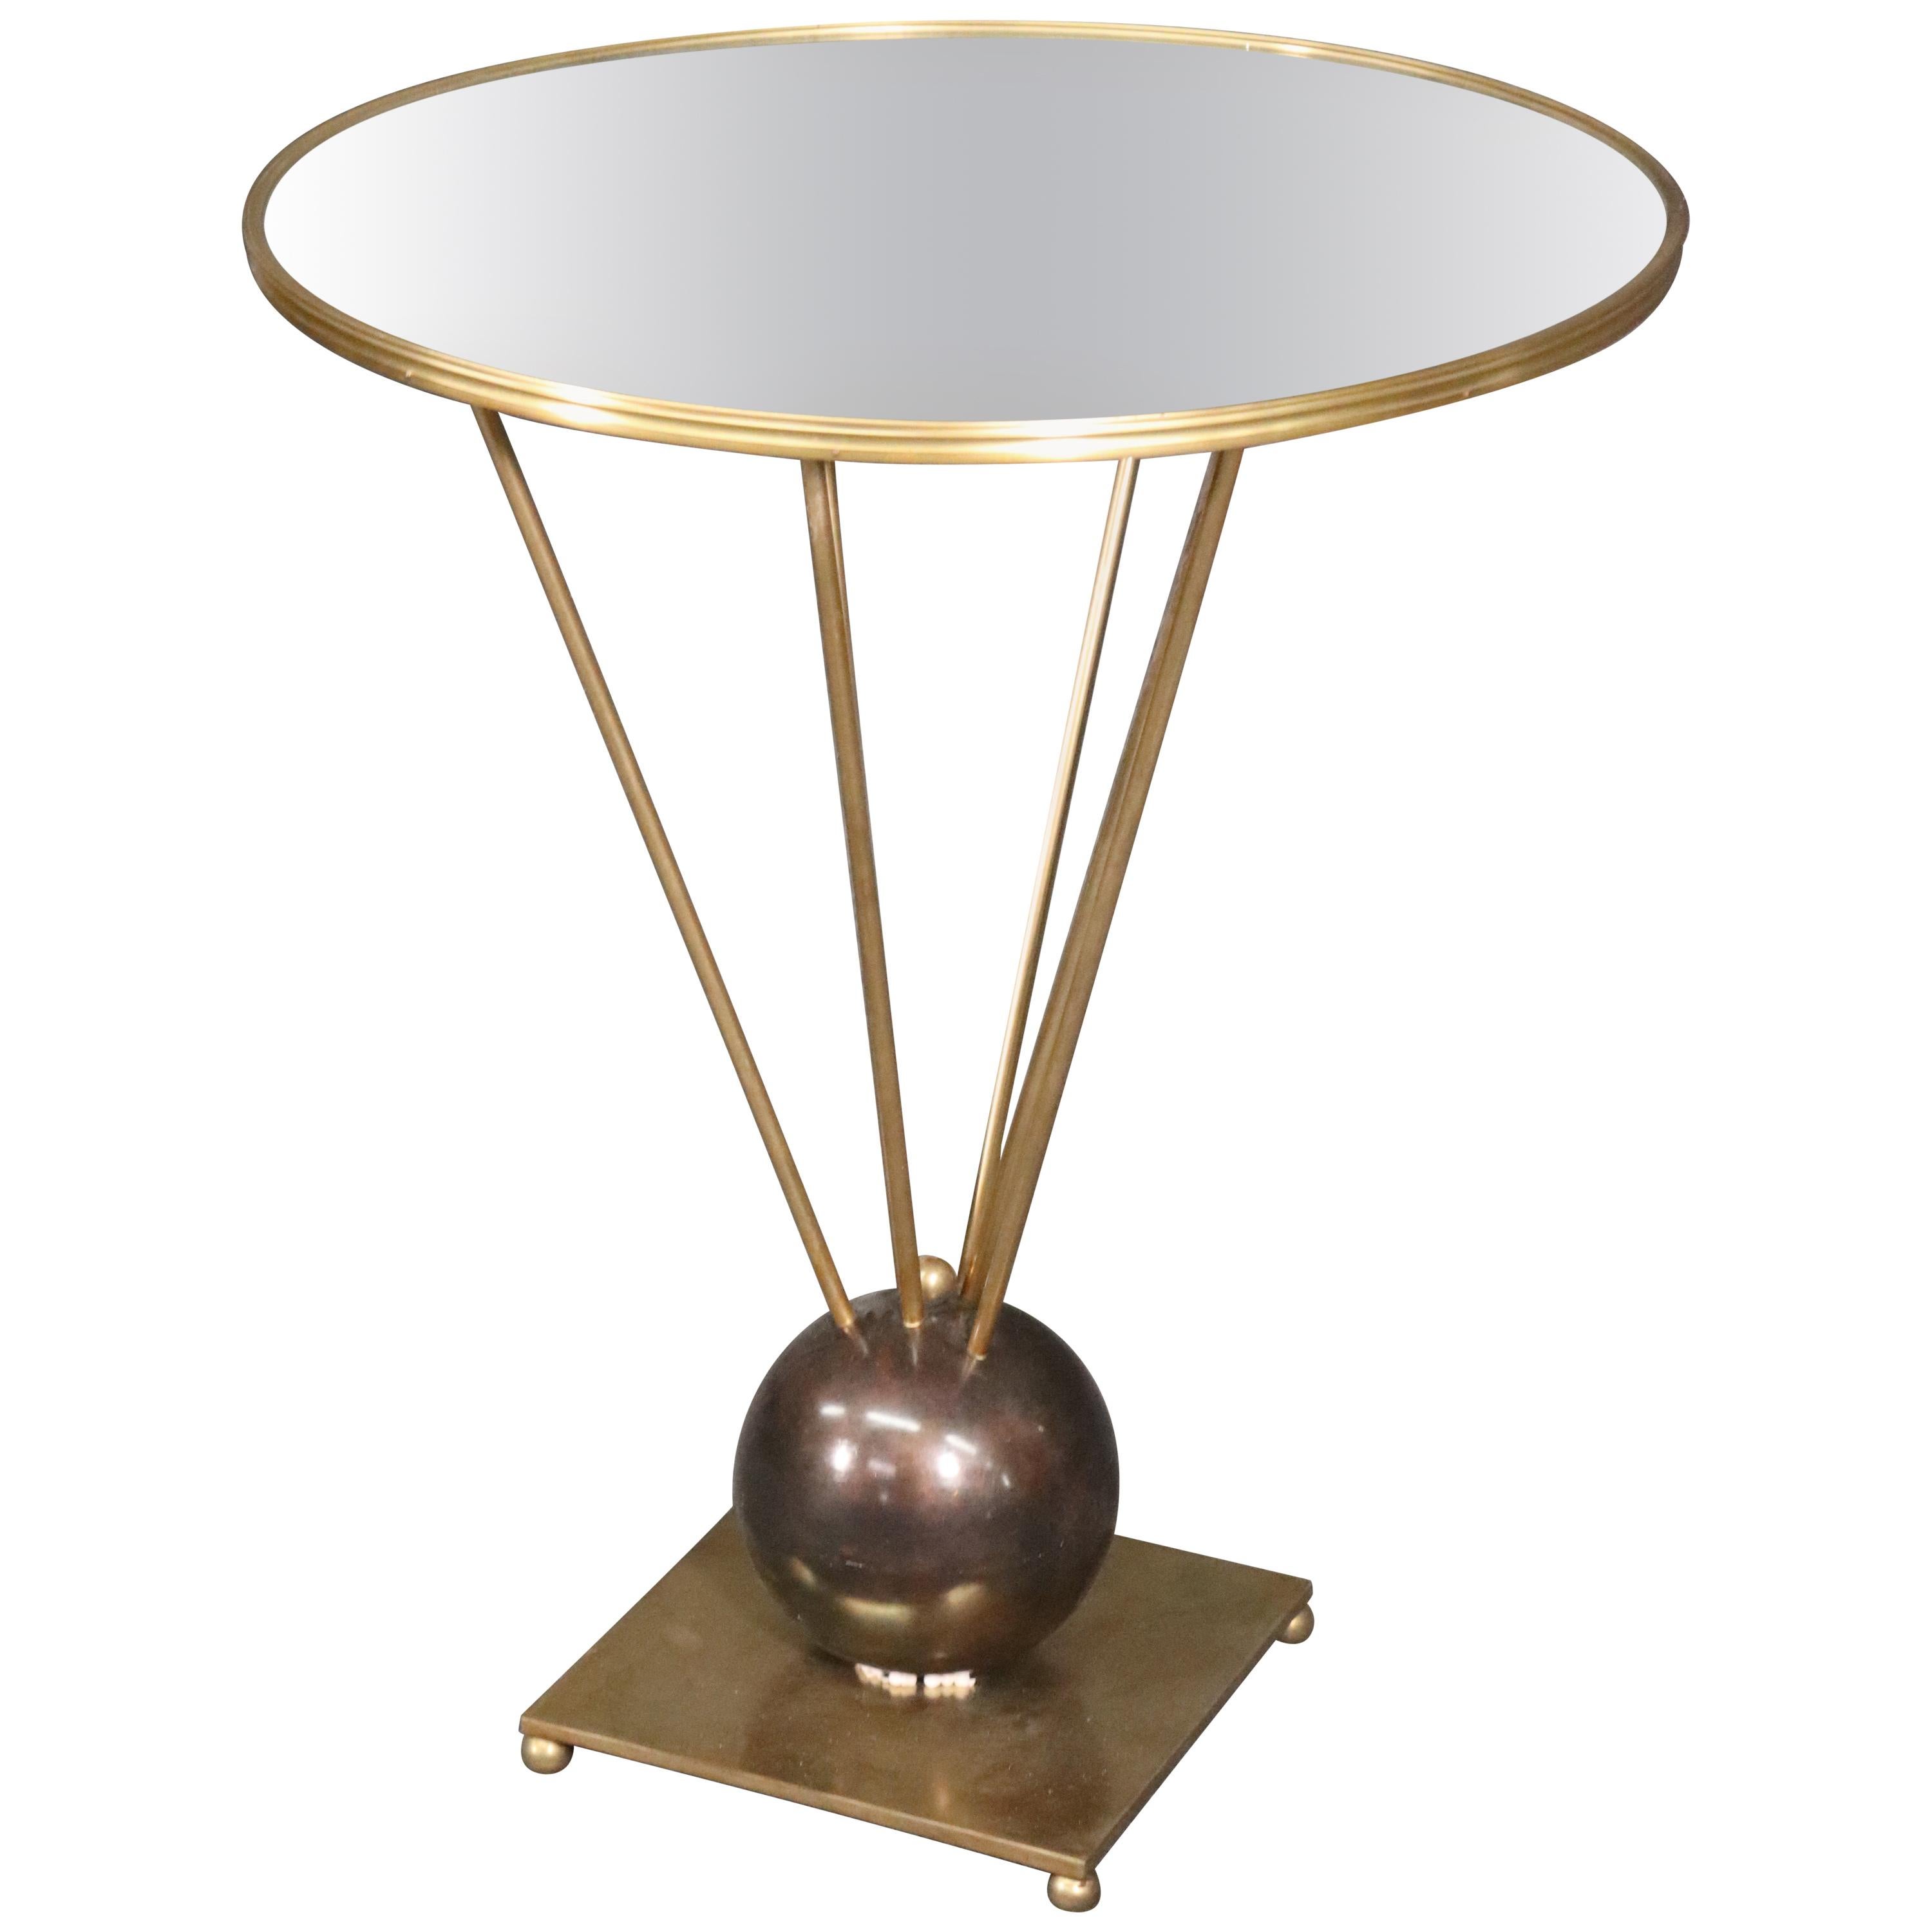 John Vesey Attributed Solid Brass Glass Geuridon End Table, circa 1960